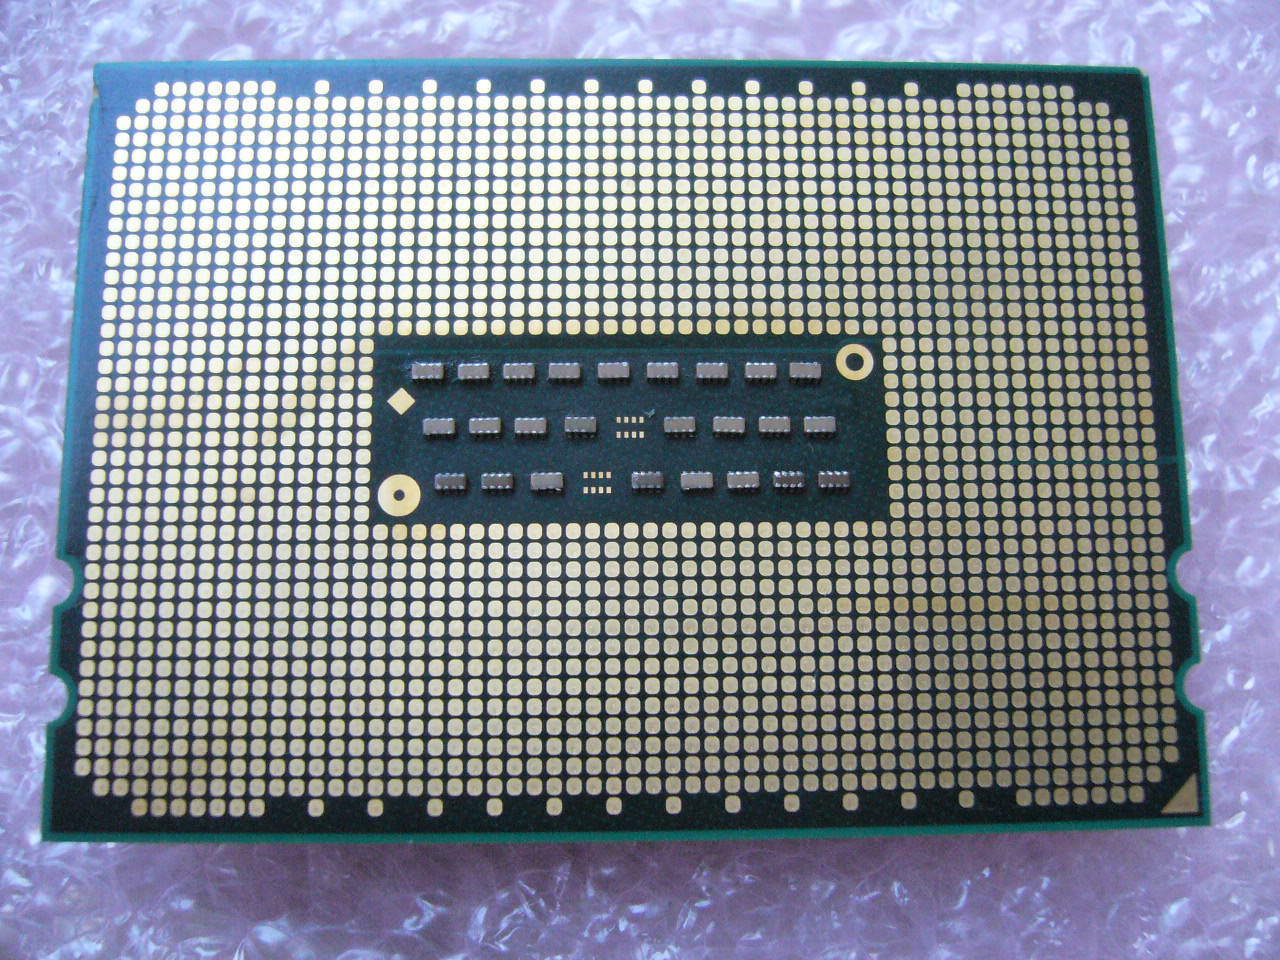 QTY 1x AMD Opteron 6284 SE 2.7 GHz Sixteen Core (OS6284YETGGGU) CPU Tested G34 - Click Image to Close